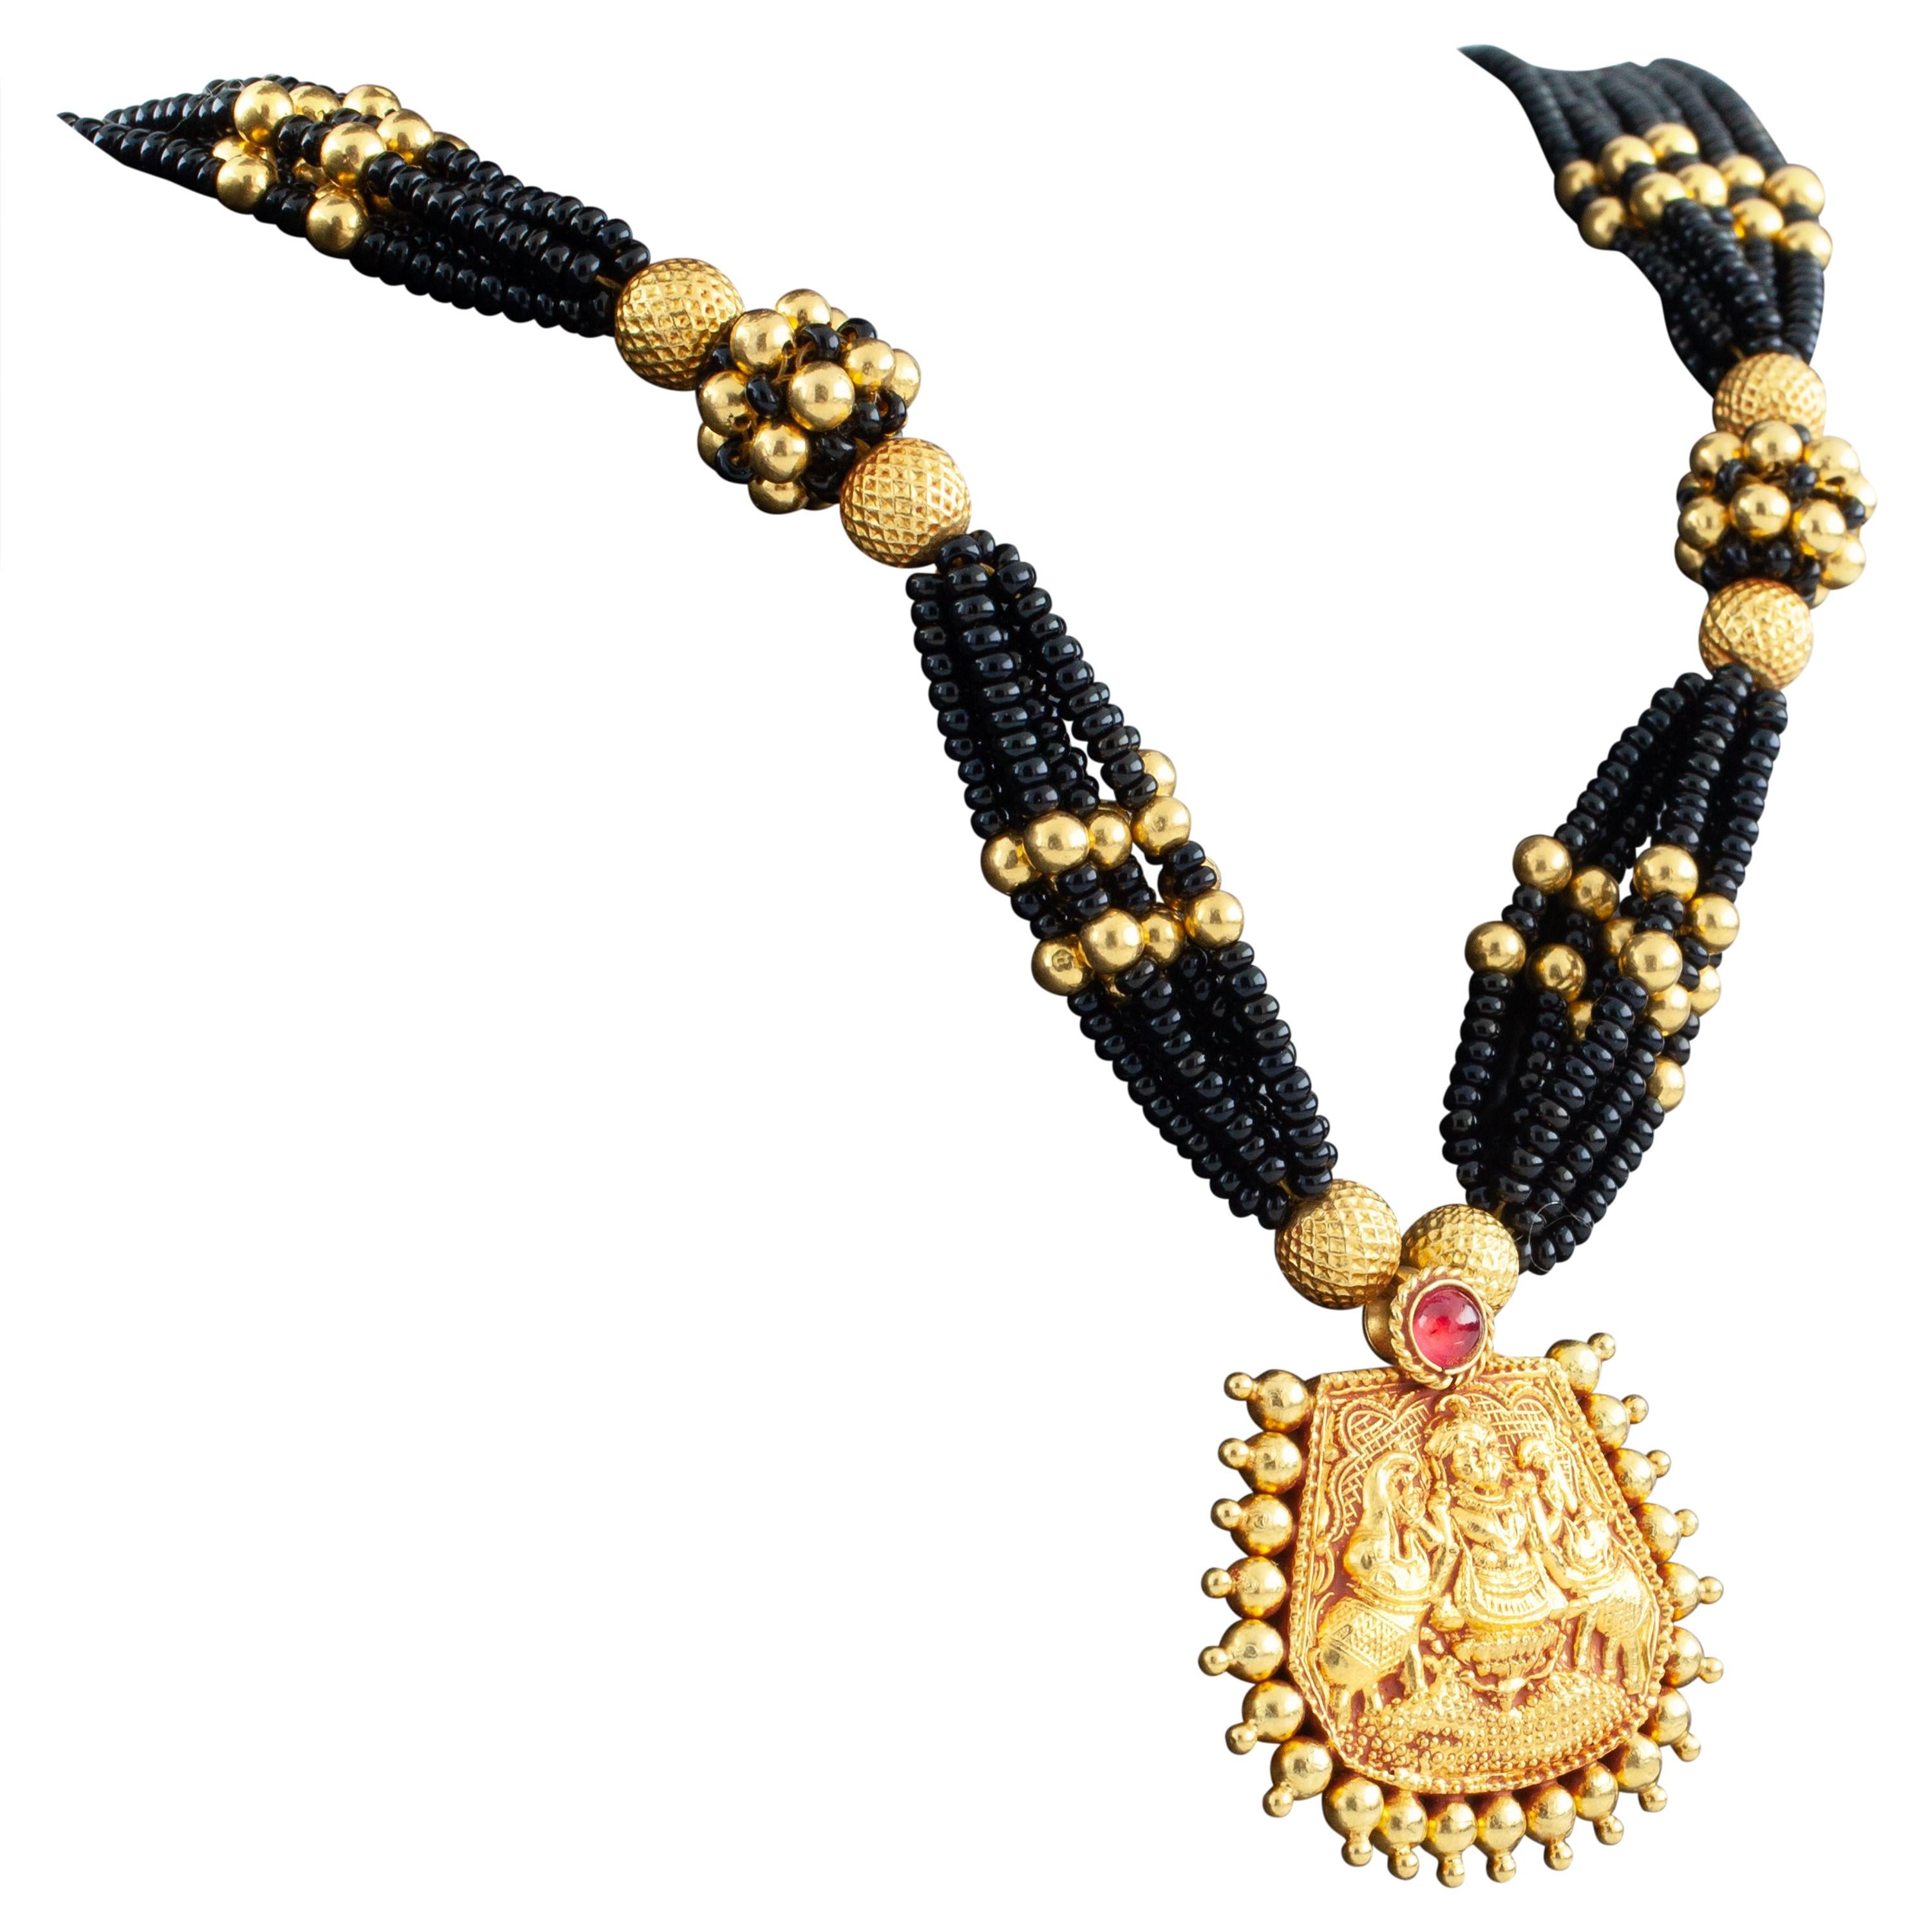 22 Karat KDM Yellow Gold Pendant with Gold and Black Bead Strands Necklace For Sale